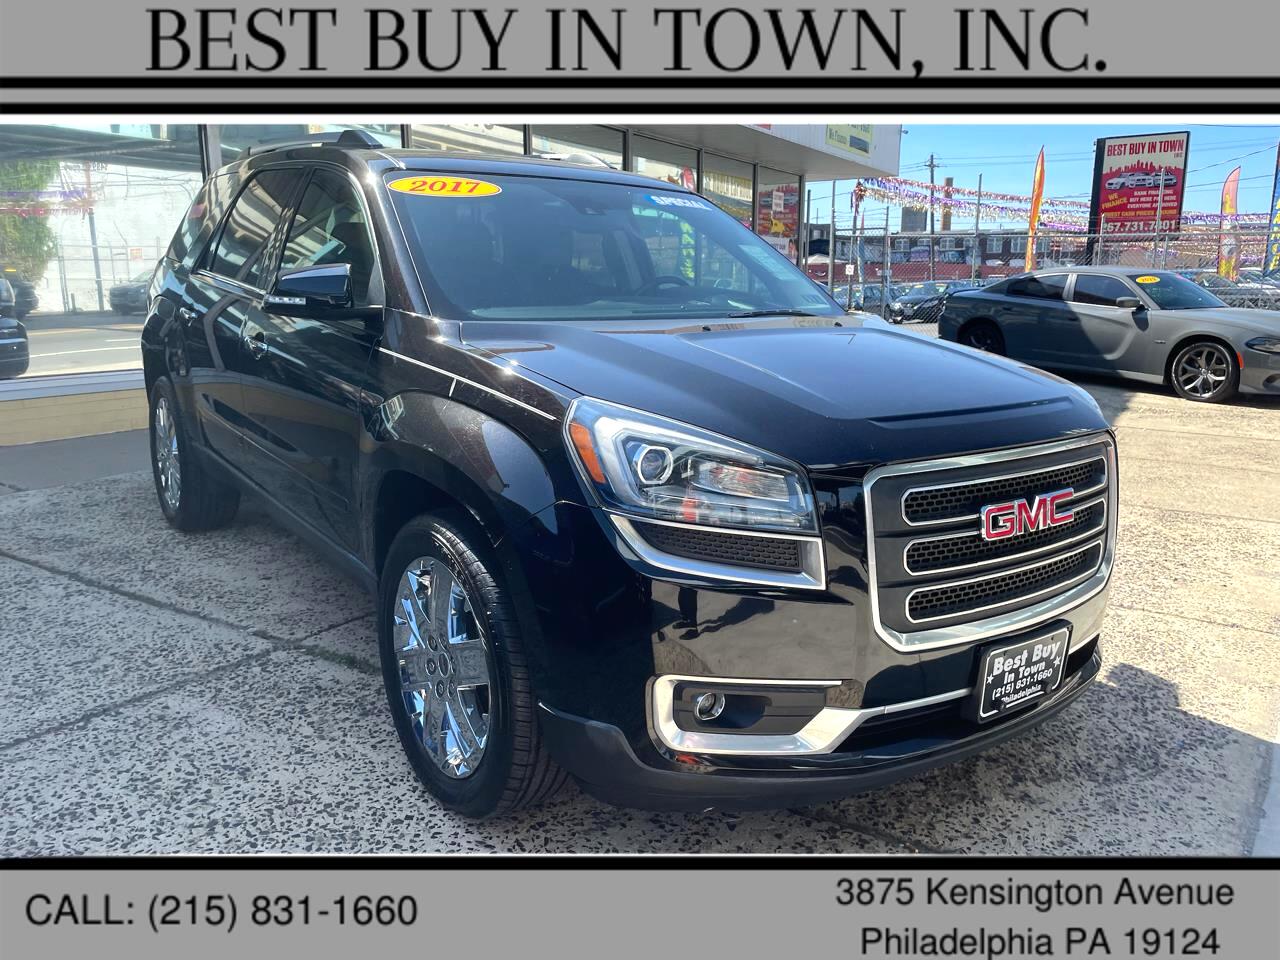 GMC Acadia Limited AWD 4dr Limited 2017